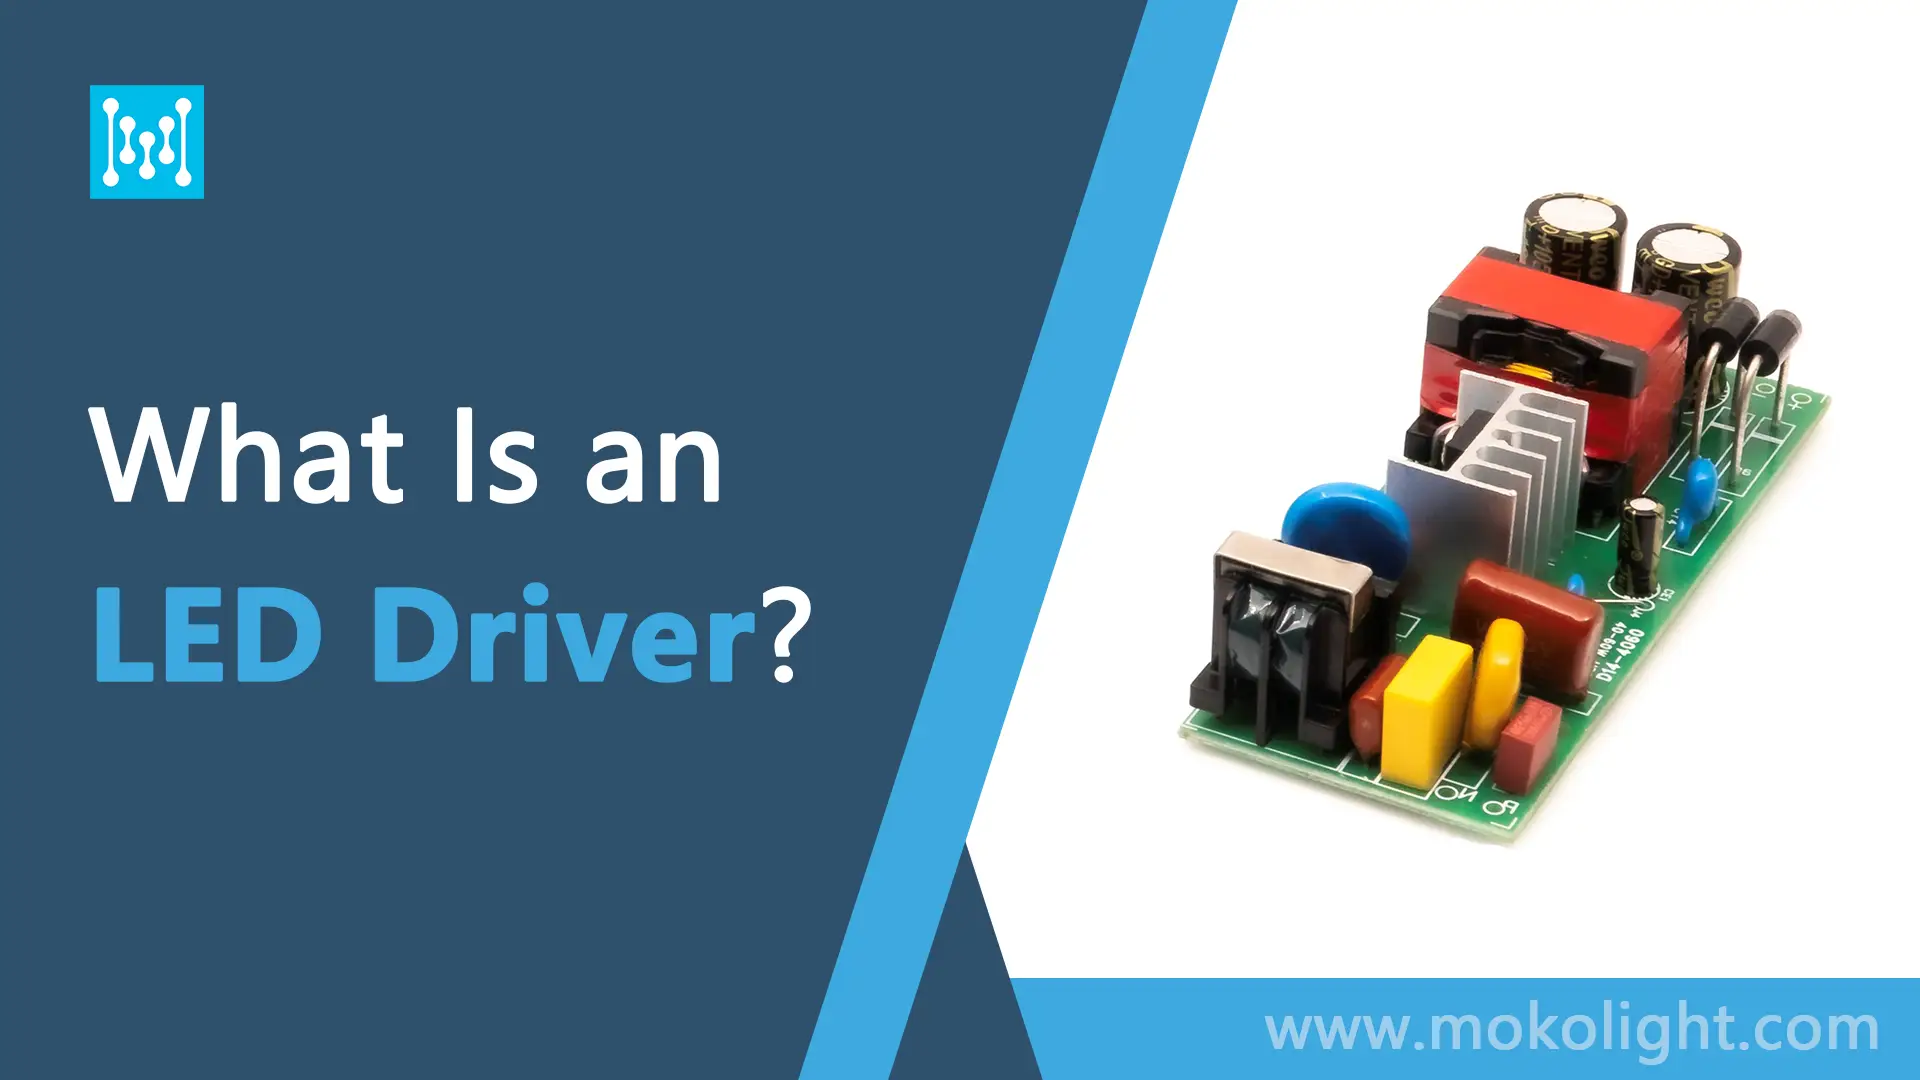 LED Driver - Everything to know about LED Drivers